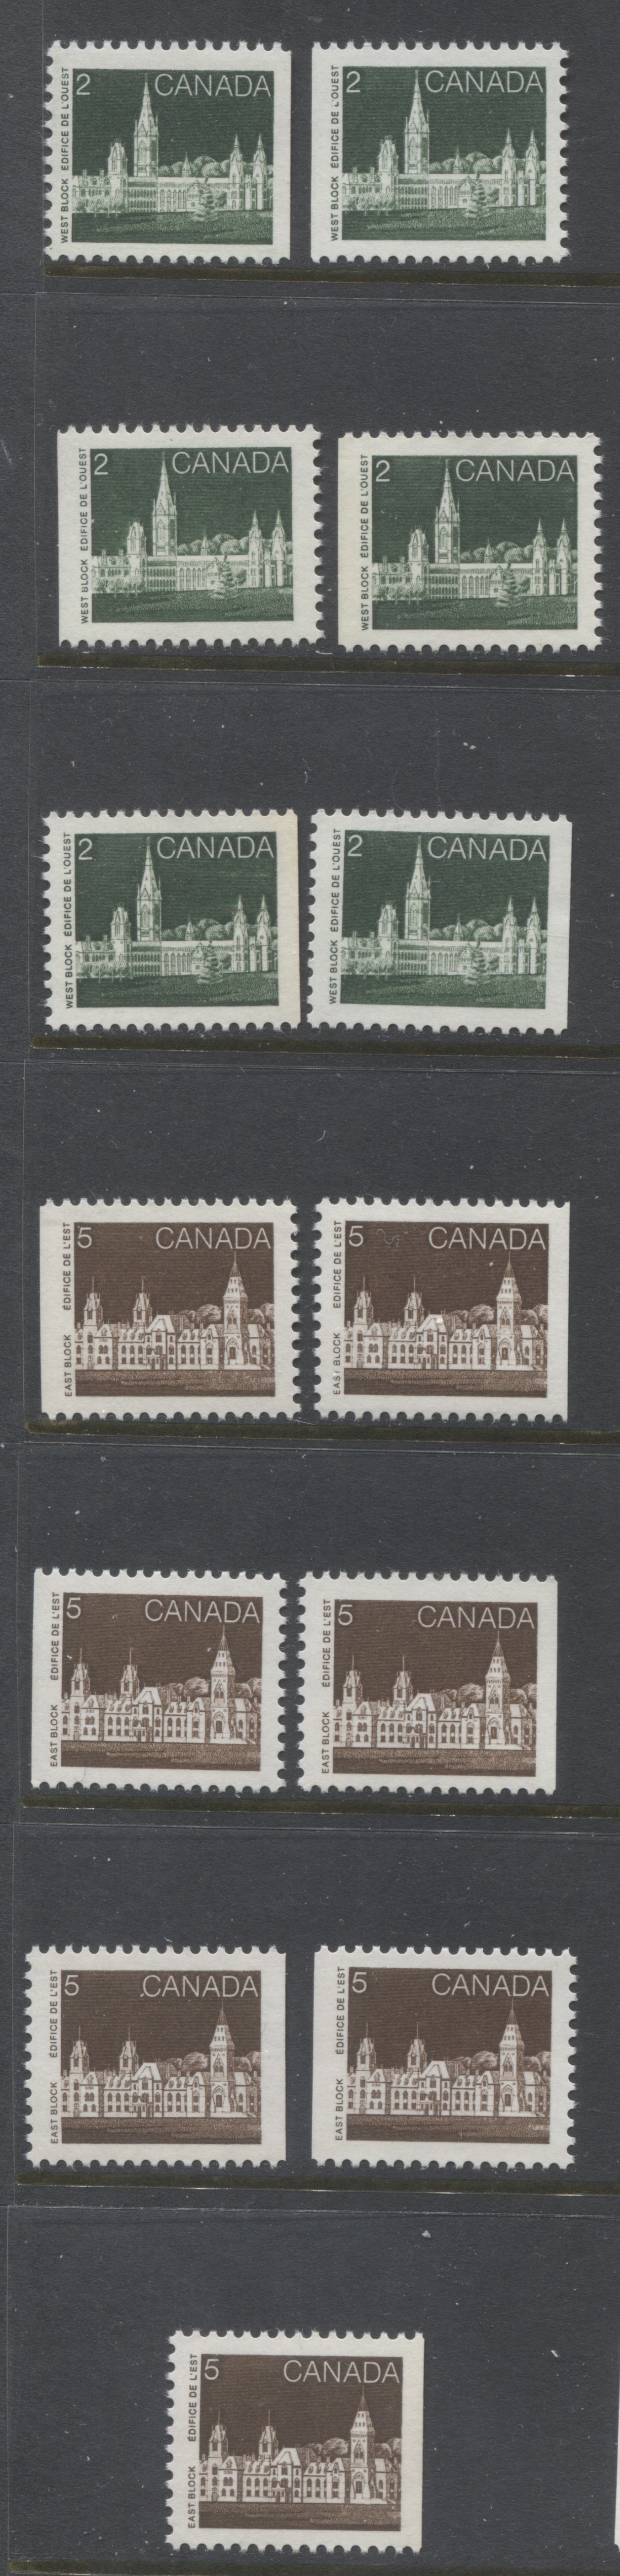 Canada #939, 939i, 941, 941ii 2c. 5c Deep Green & Deep Brown Parliament Buildings, 1982-1987 Artifacts & National Parks Issue, 13 VFNH Booklet Singles,NF/NF to MF, Abitibi Papers